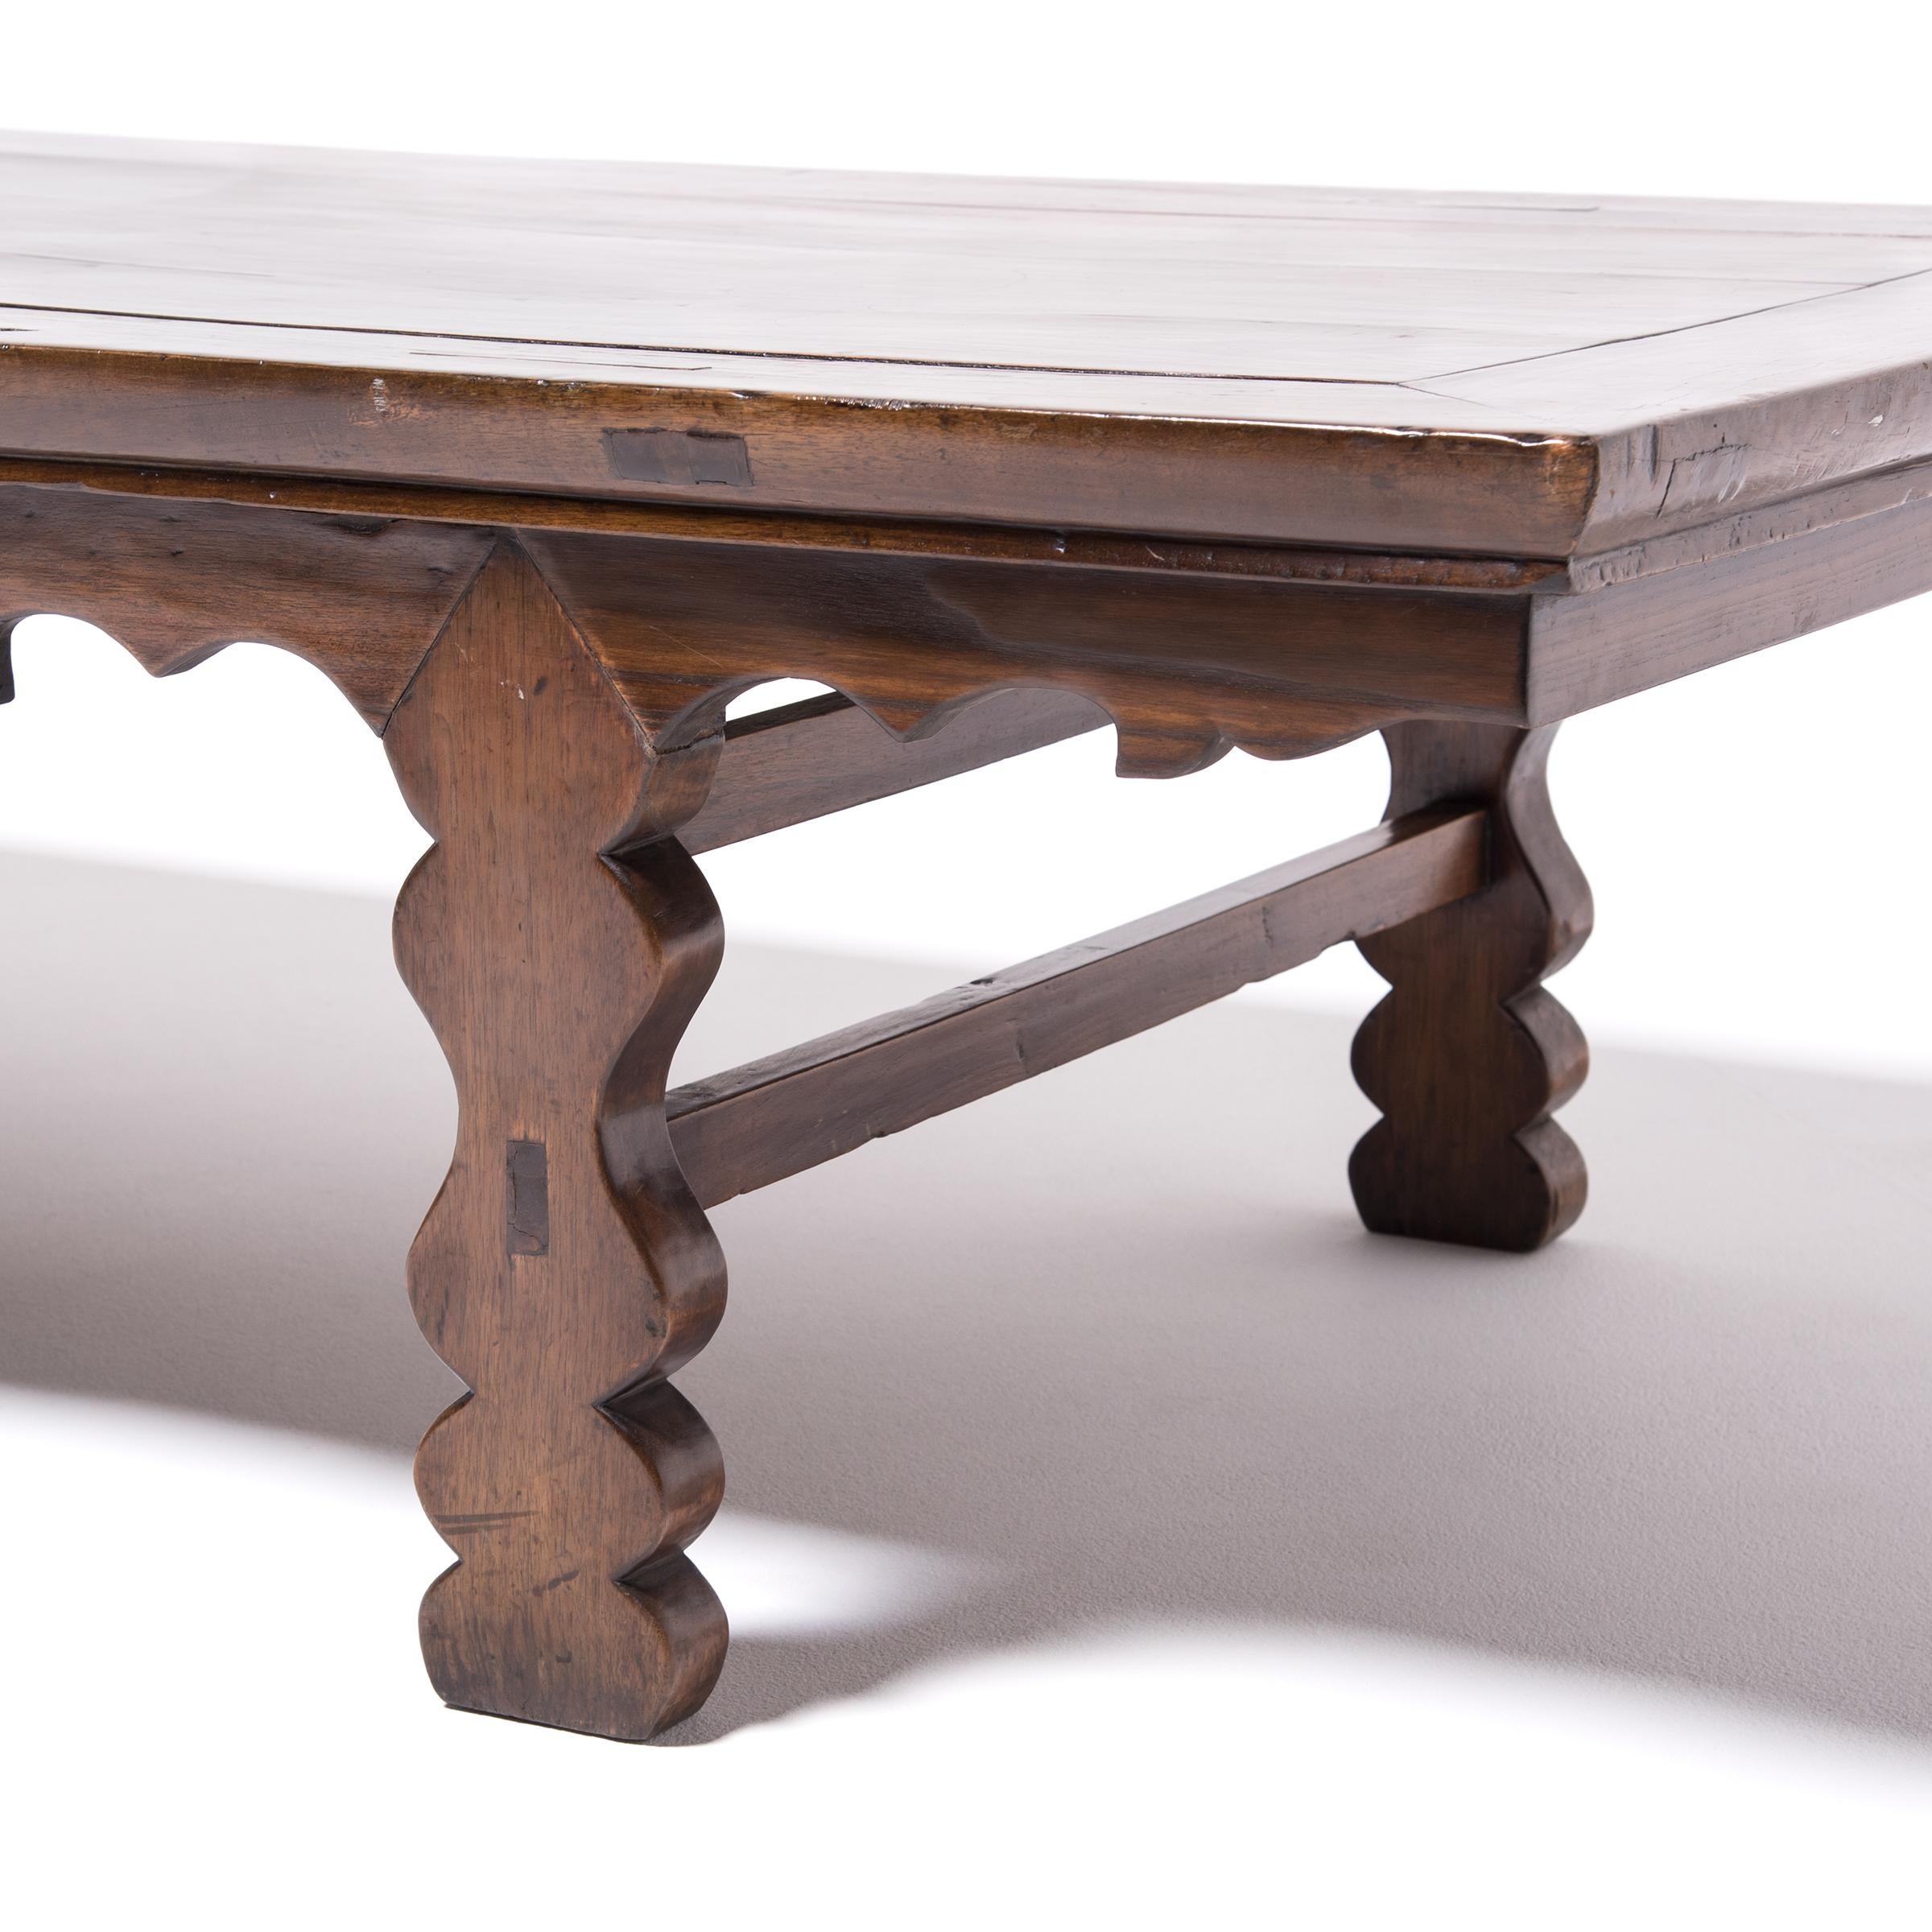 19th Century Chinese Low Table with Carved Apron, c. 1850